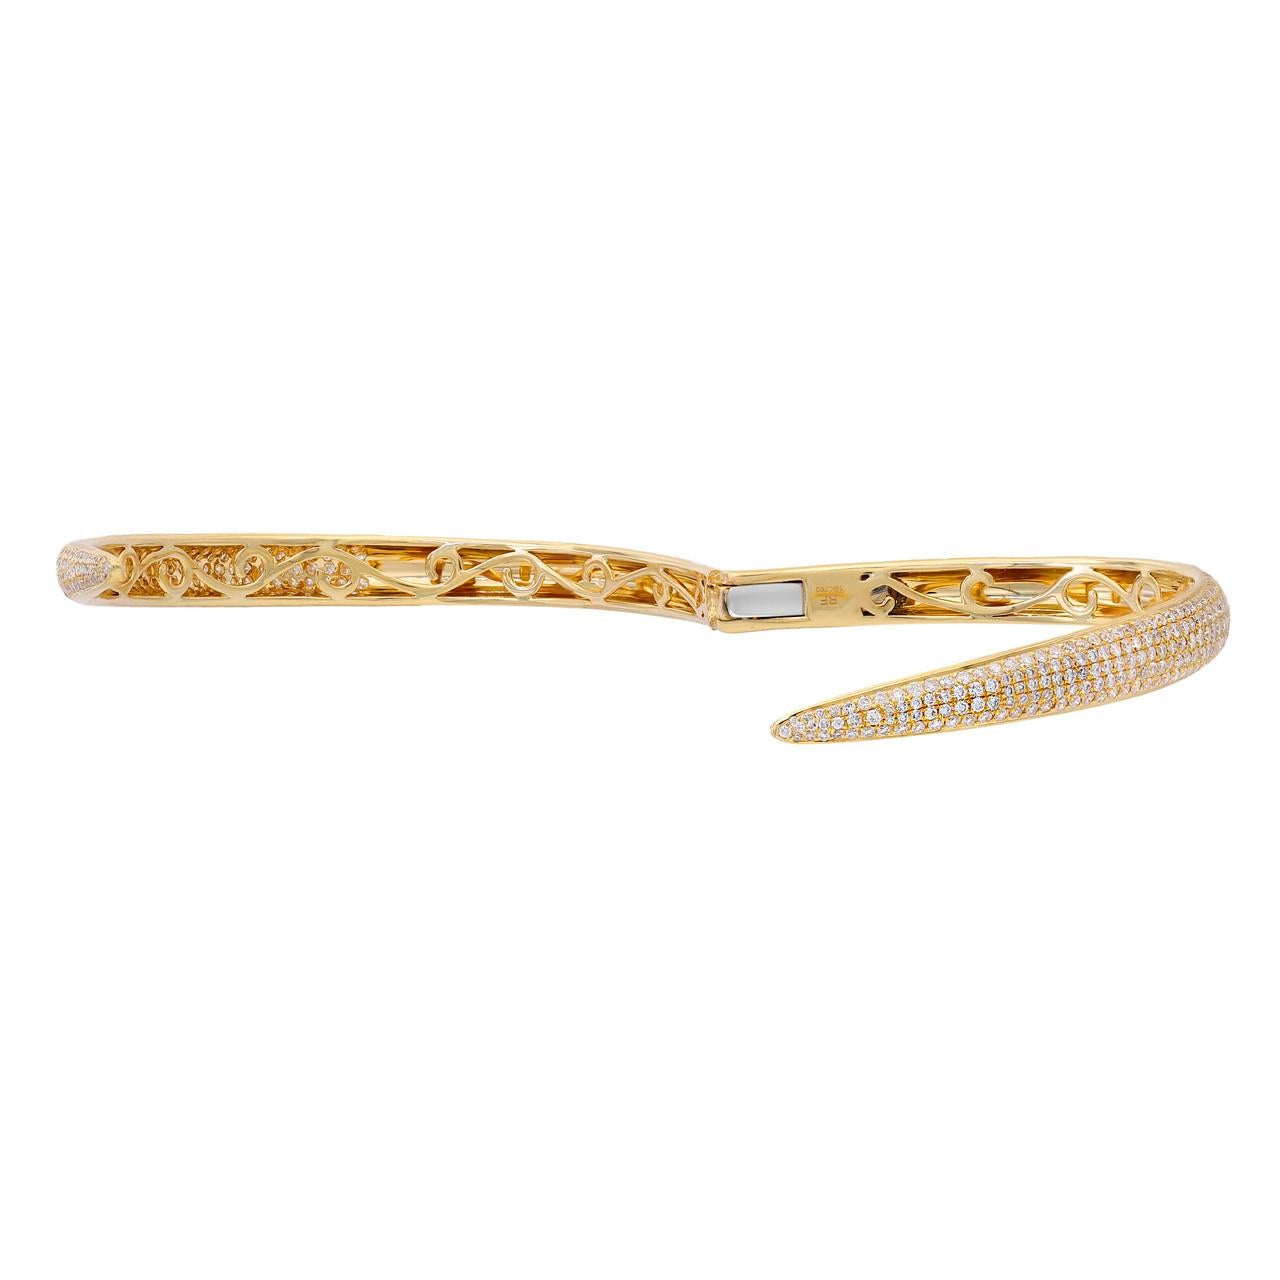 3.02 Carat Pave Set Round Cut Diamond Bangle Bracelet 18K Yellow Gold In New Condition For Sale In New York, NY